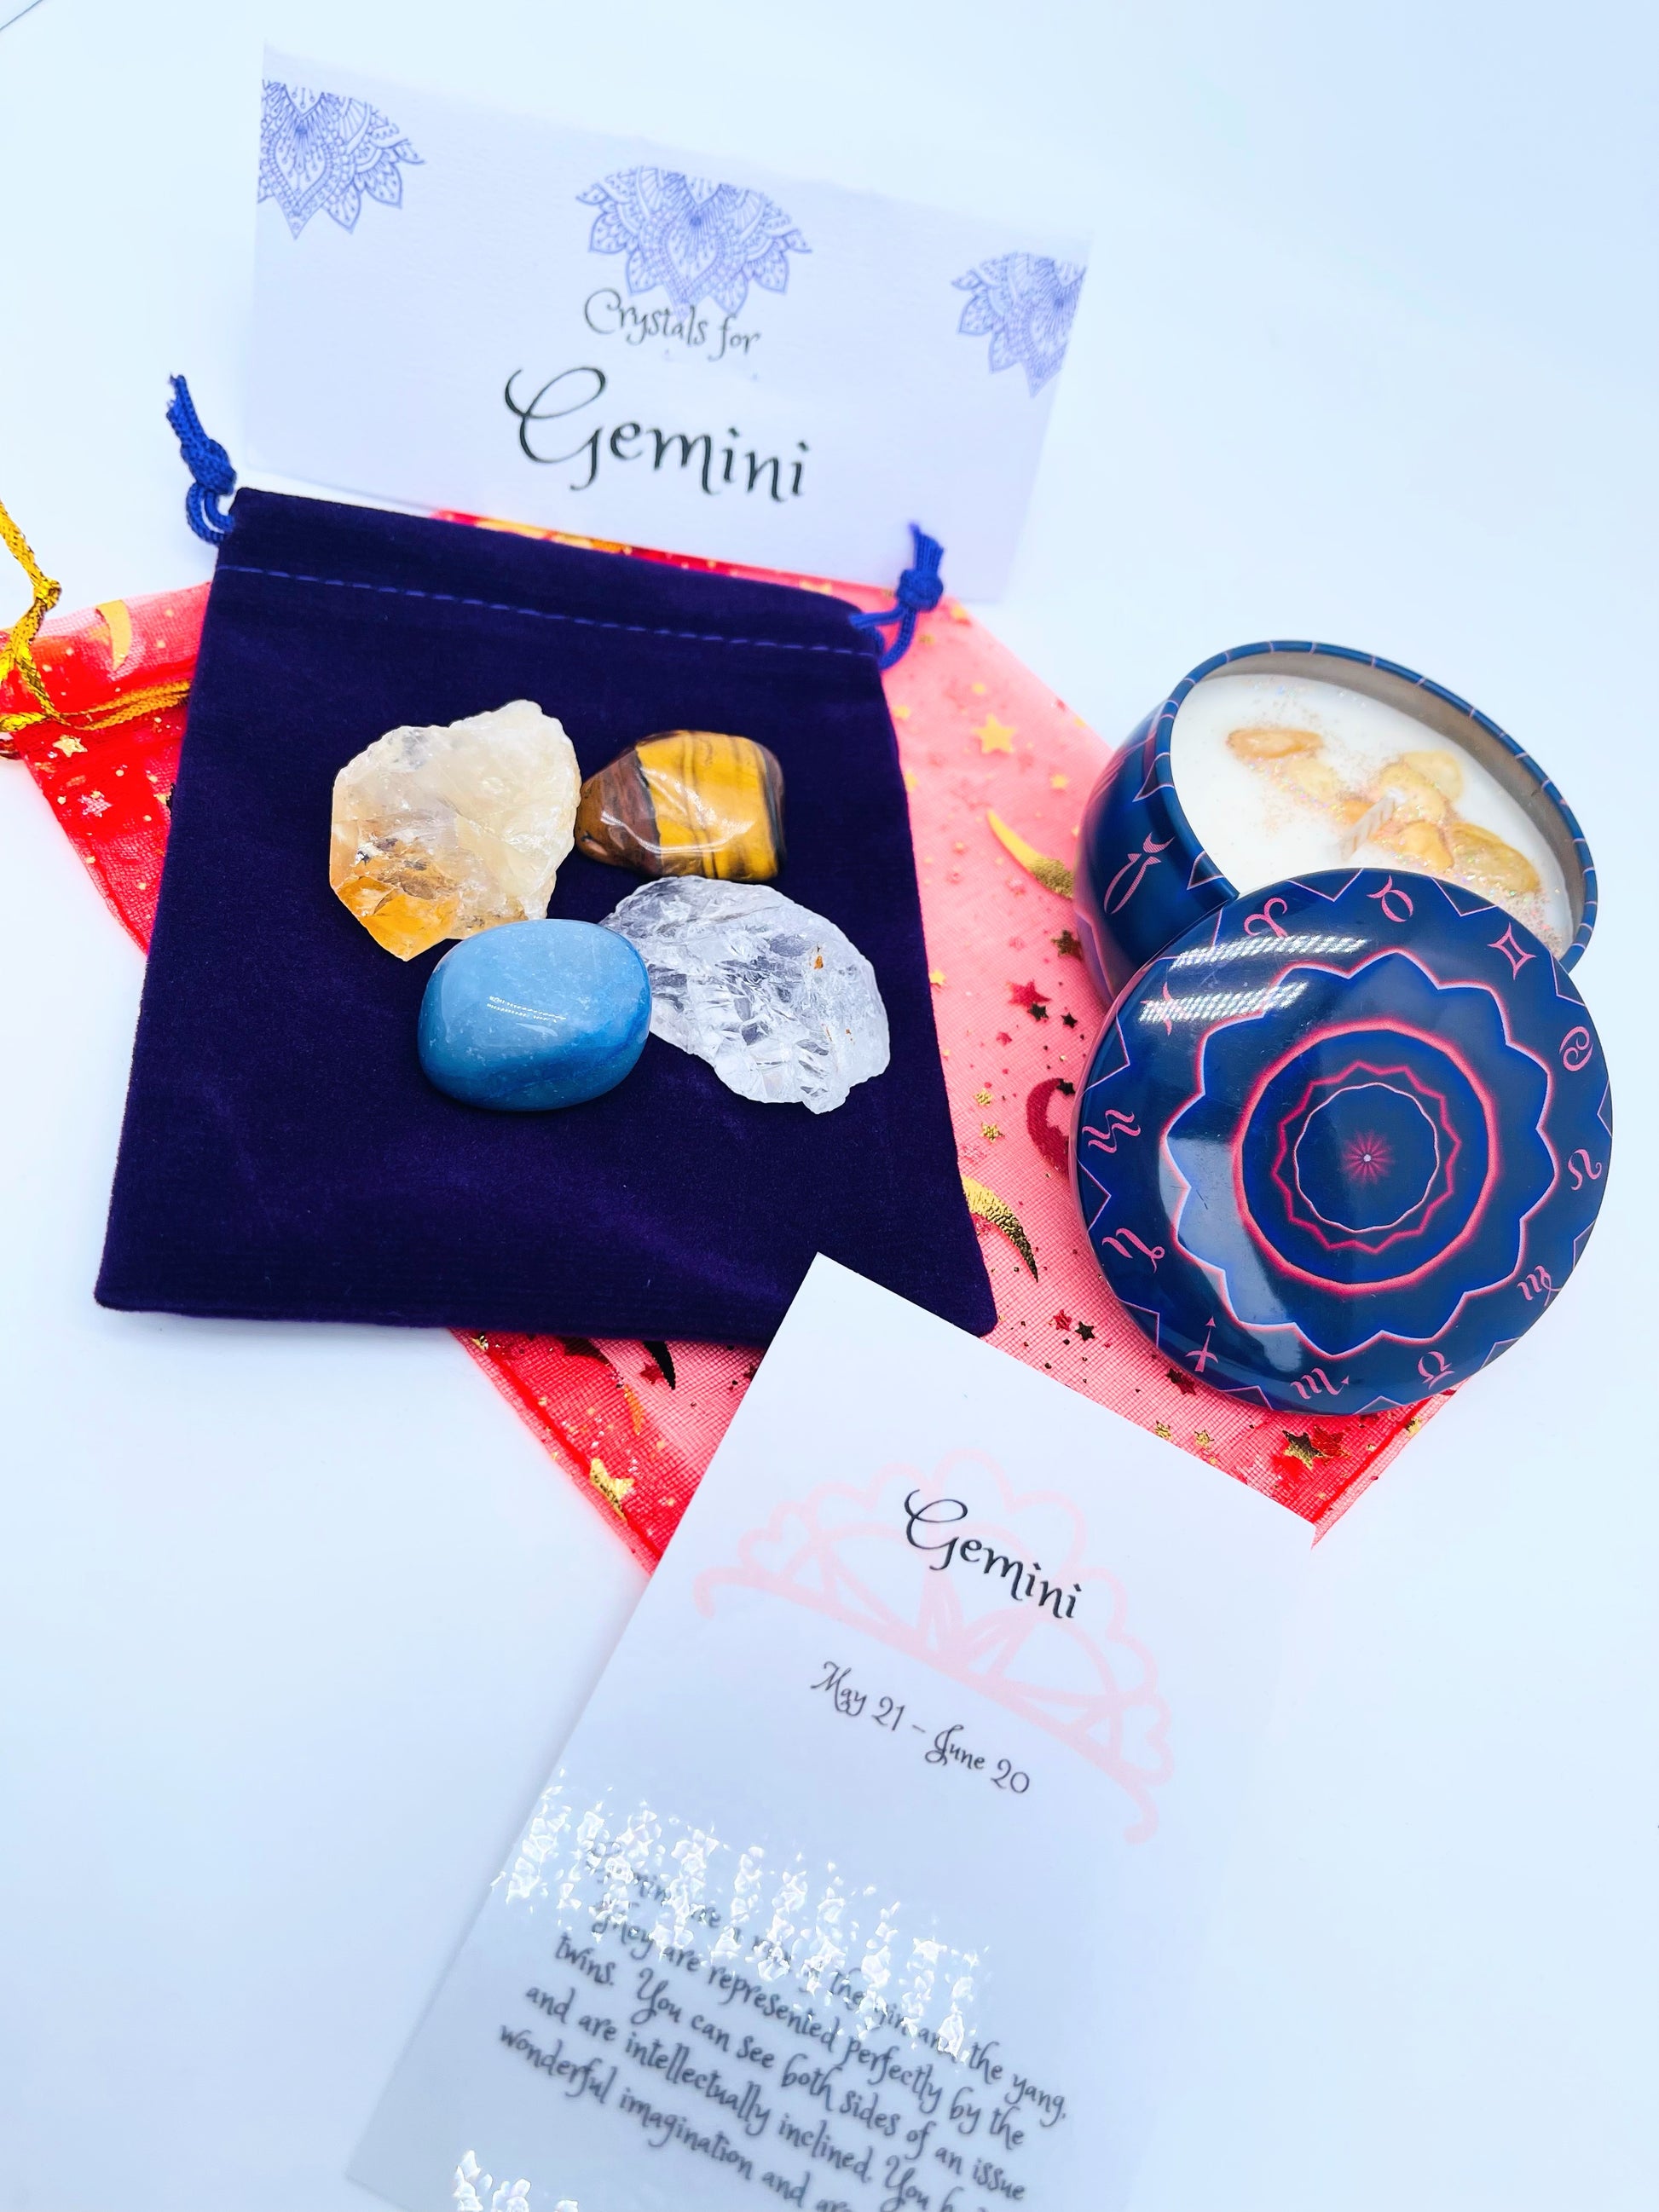 Gemini zodiac candle gift set with candle and four crystals for this sign sitting on a velvet bag.